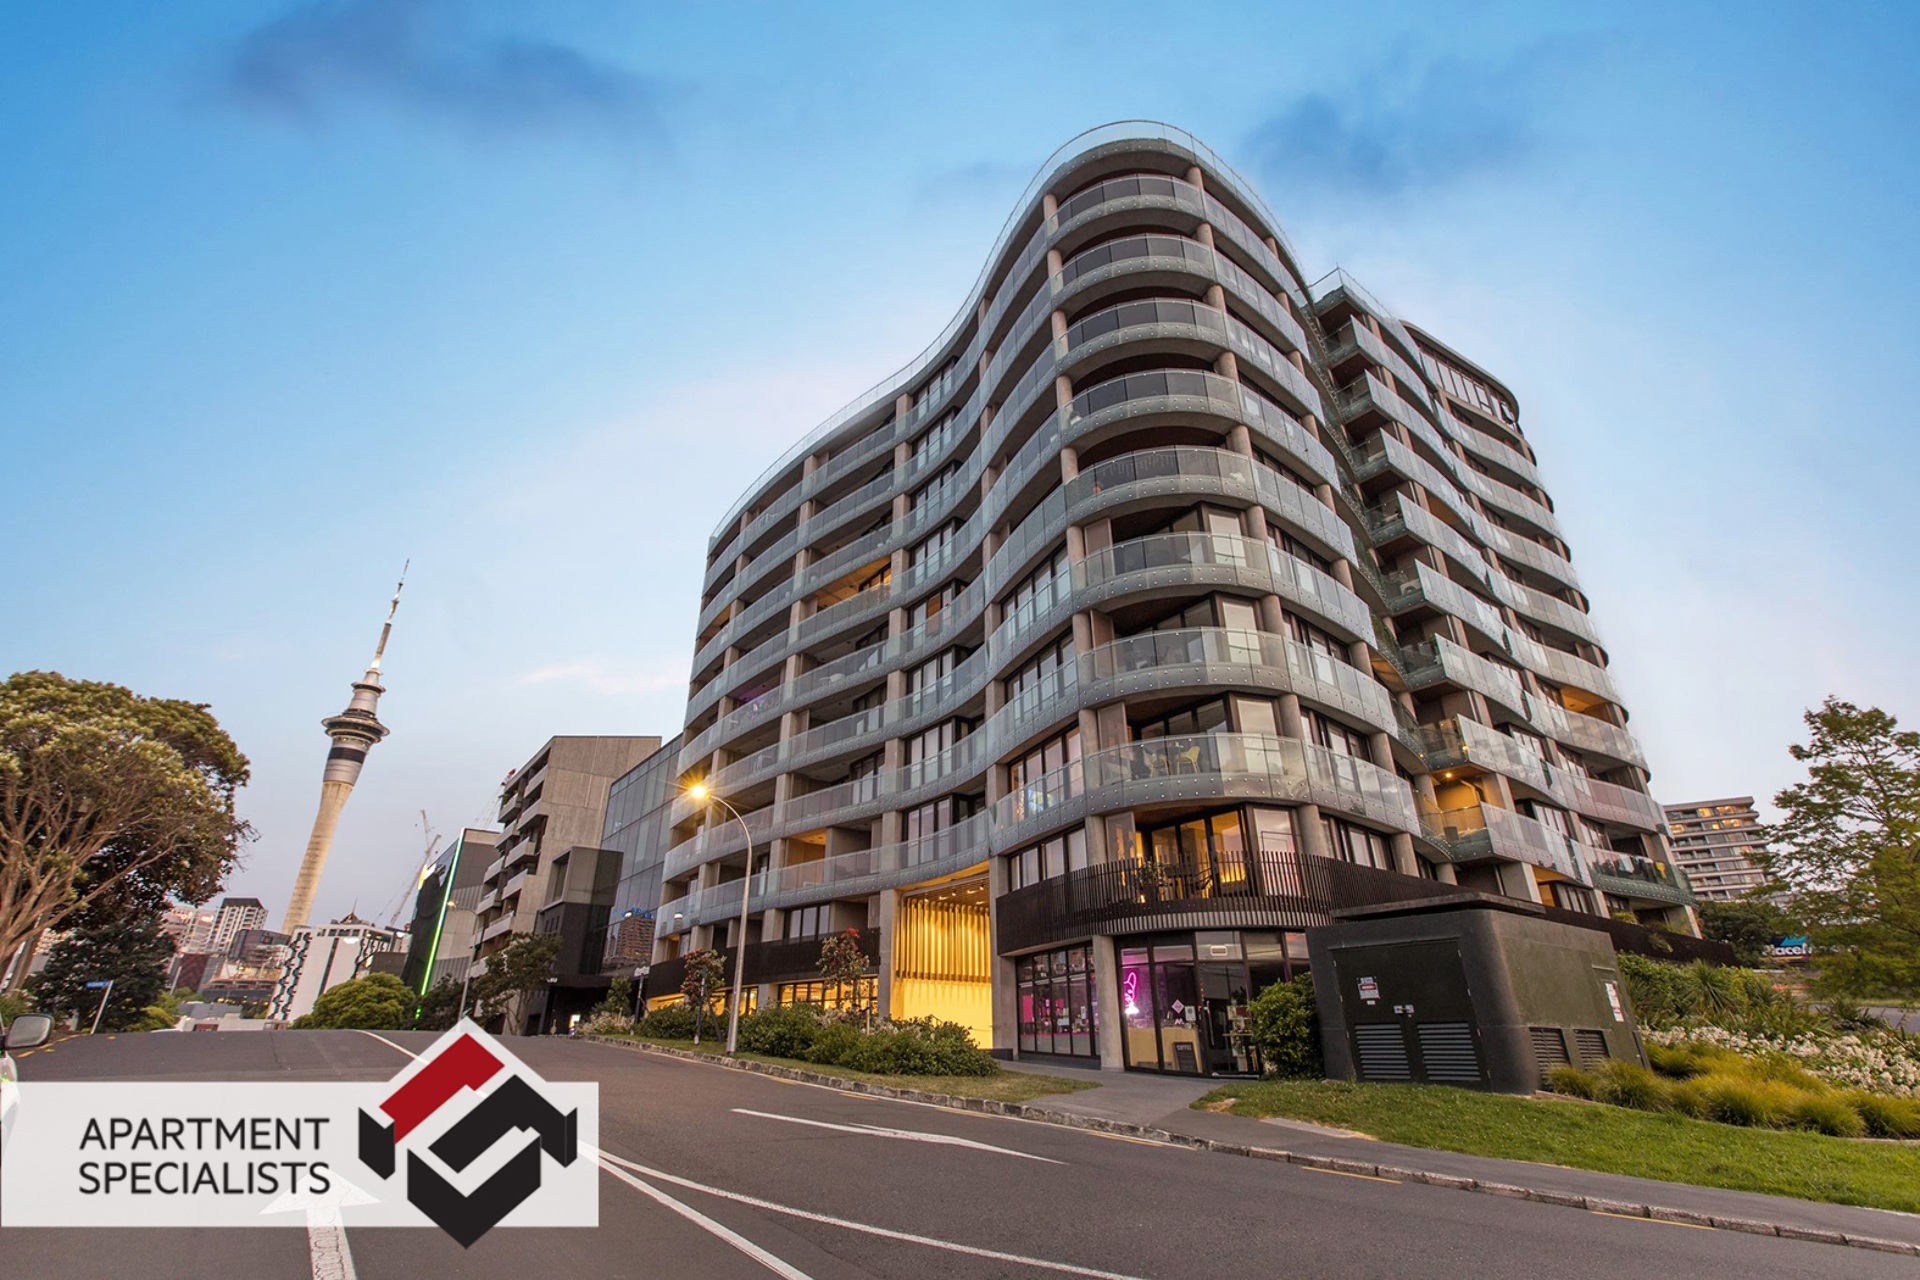 2 | 70 Sale Street, Freemans Bay | Apartment Specialists